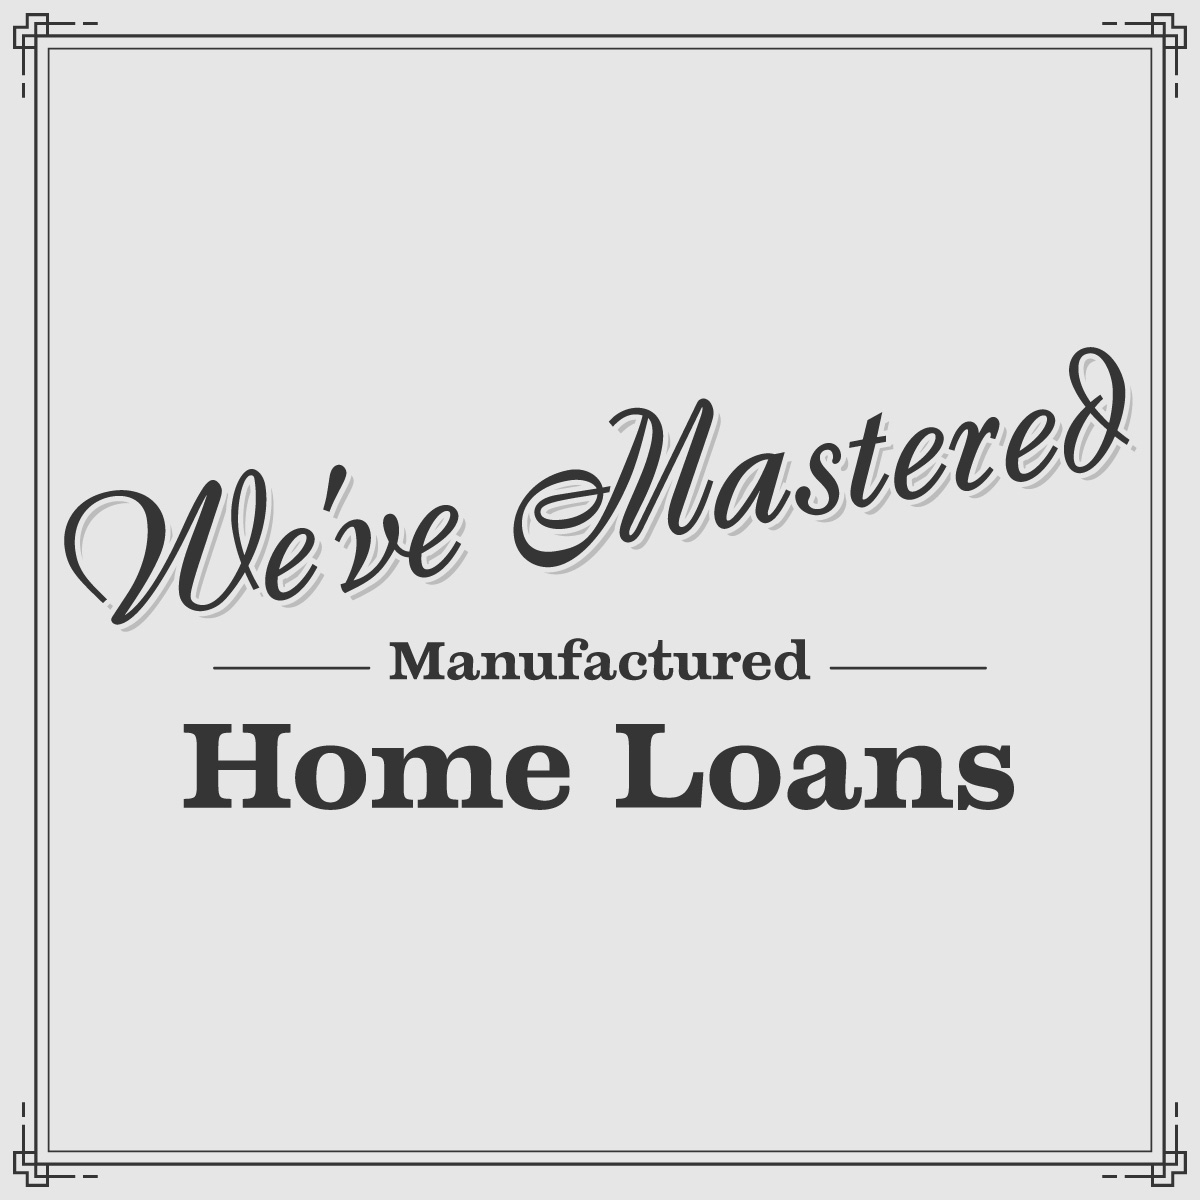 Considering a manufactured home? You're in the right place! I offer top technology, personalized service, and affordable pricing options. 🏡 Contact us now!

🐺🐺🐺🐺
#Loanwolflending
#Mortgagebroker
#Homeloanswithabite
#Abetterbreedofhomeloans